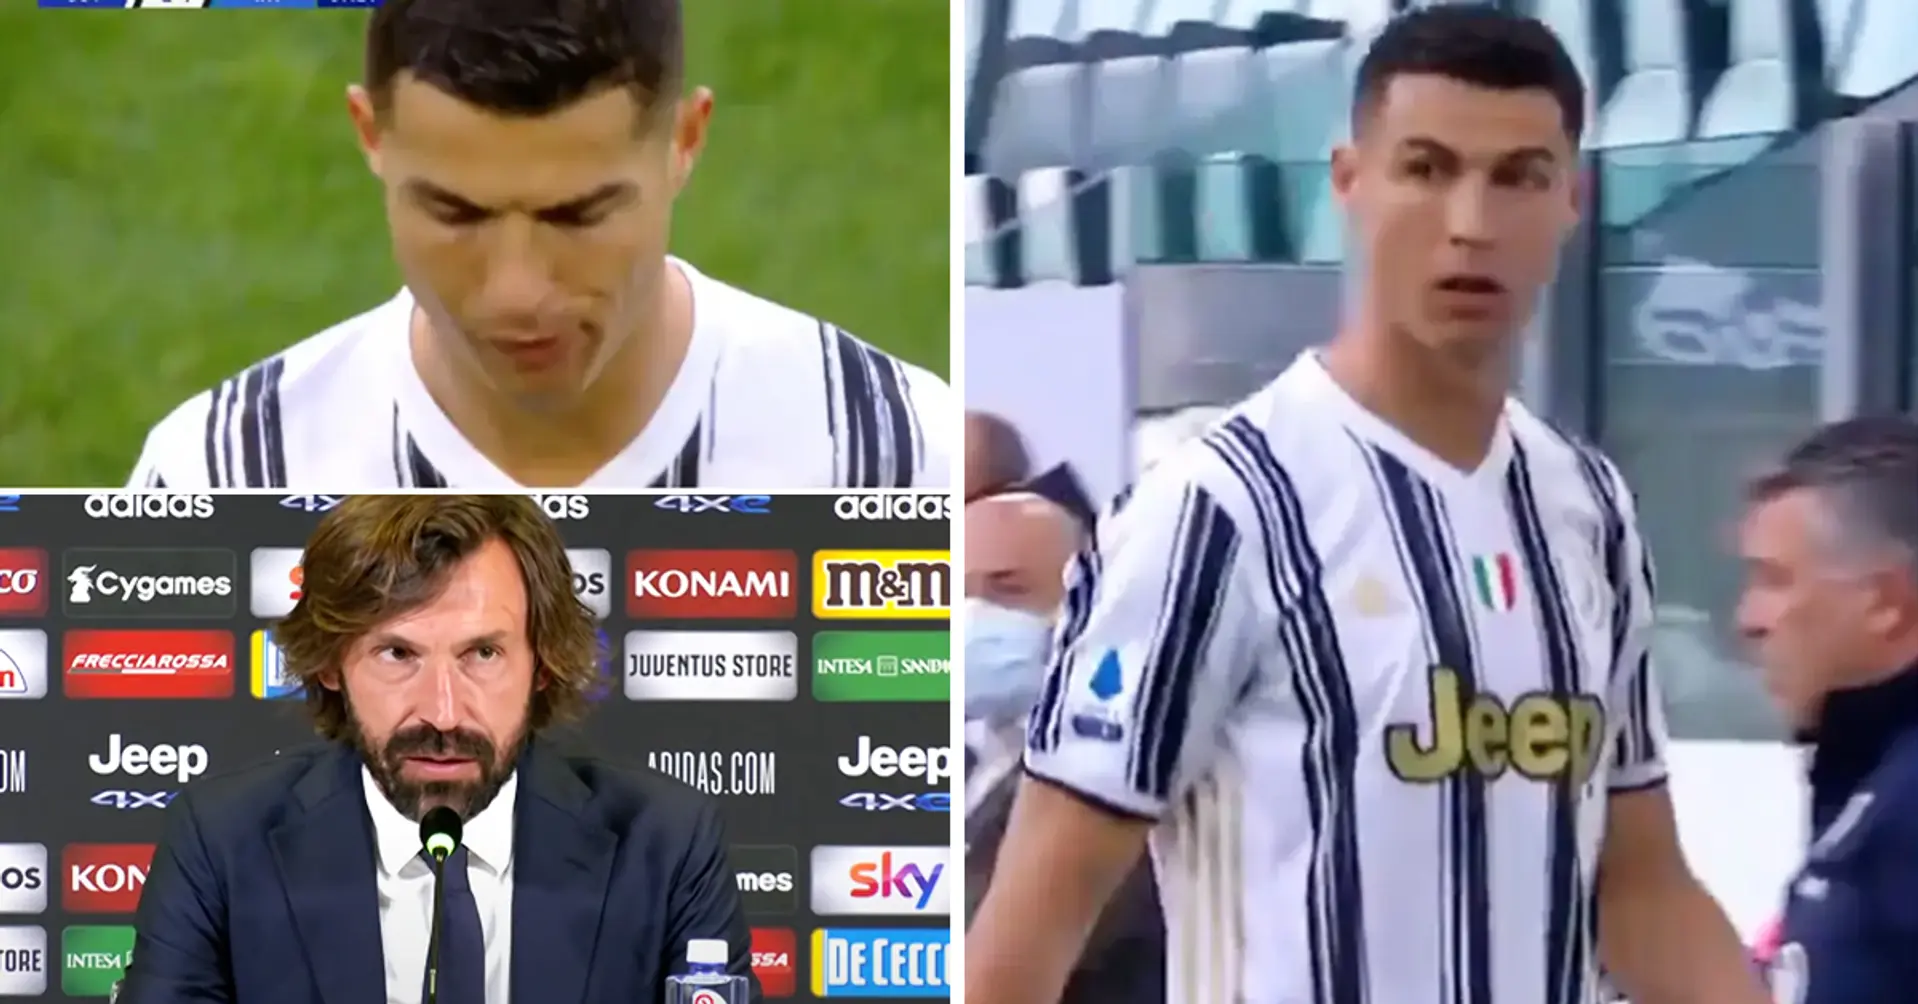 Andrea Pirlo reveals how Cristiano Ronaldo reacted to being substituted during crucial Serie A game